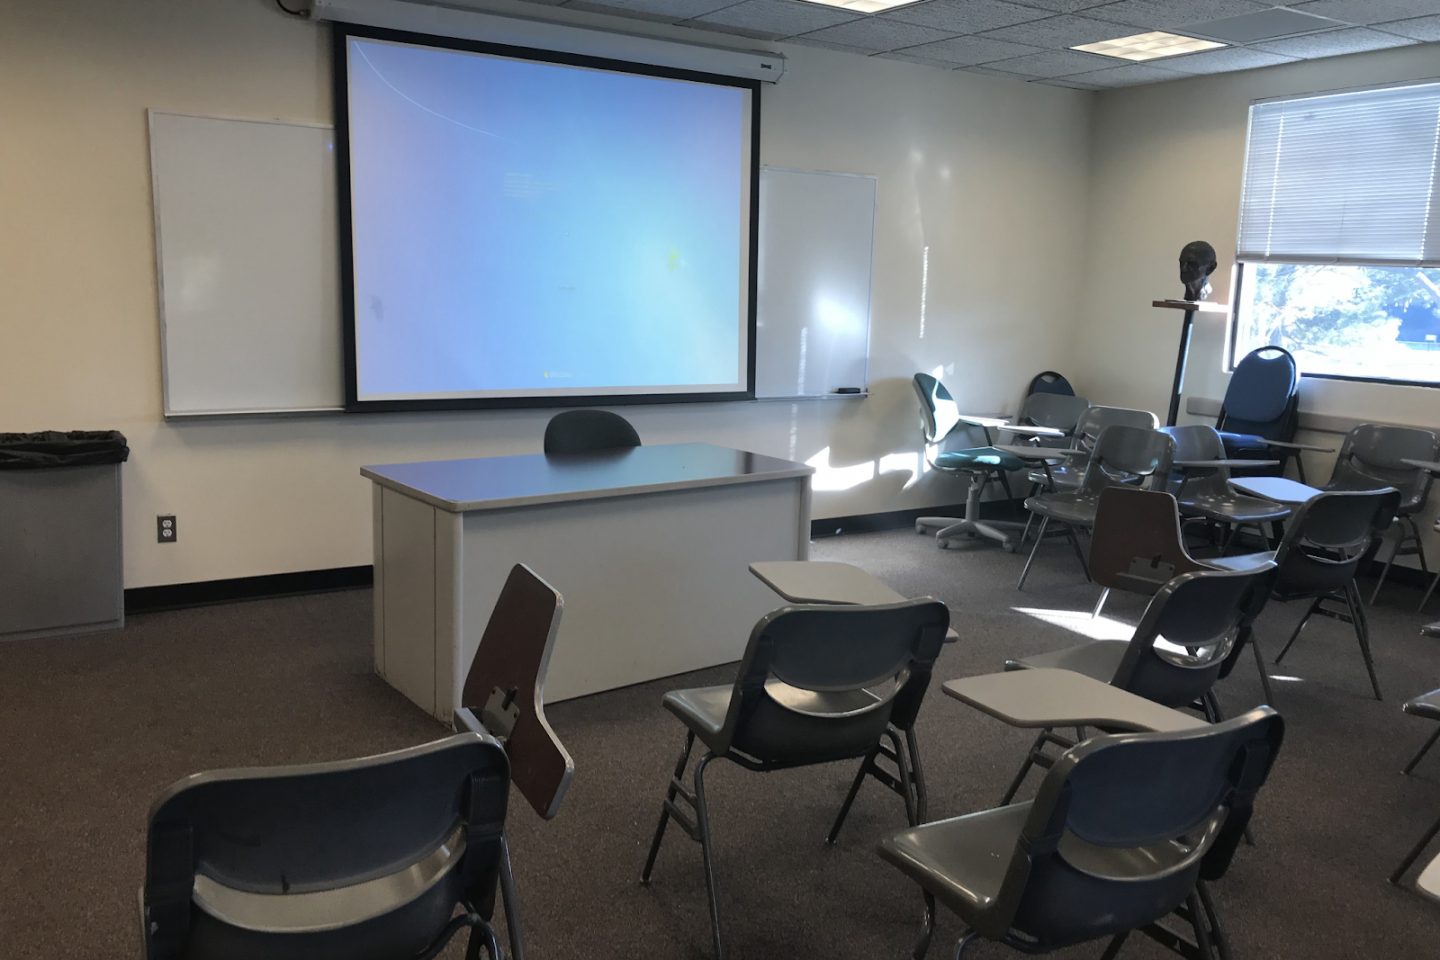 A view of the goodyear lab showing desks and projector